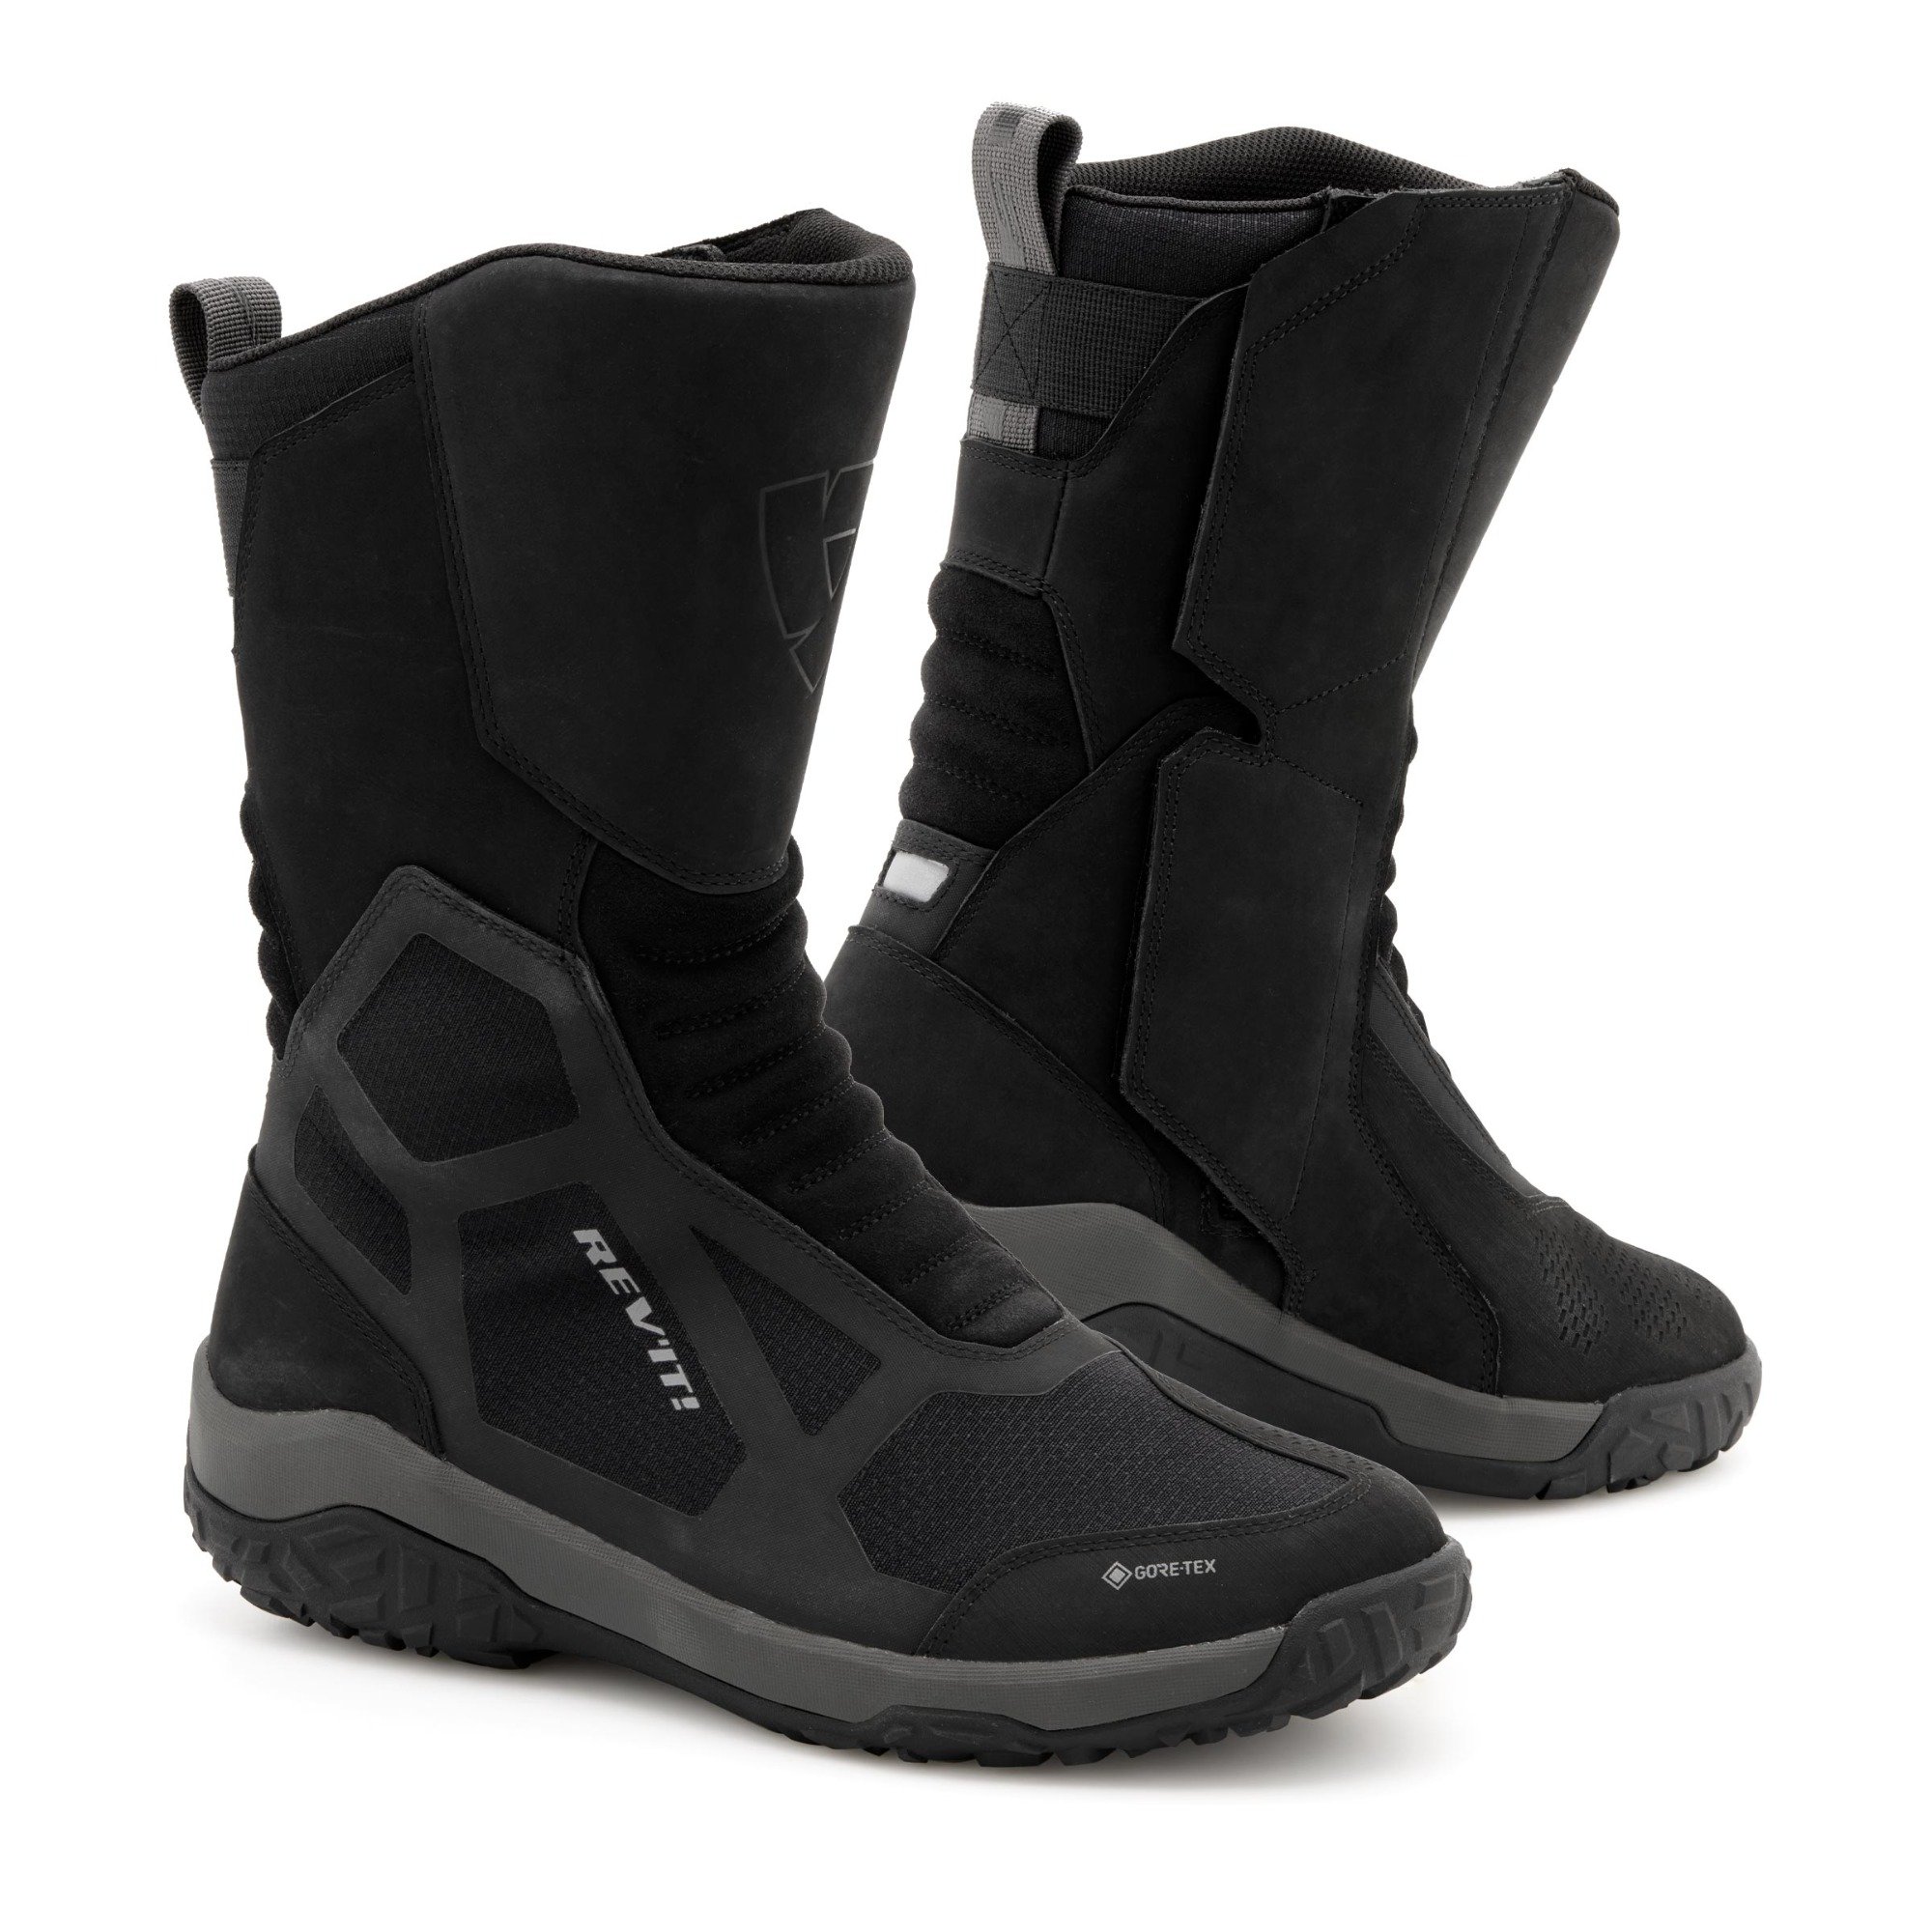 Image of REV'IT! Everest GTX Boots Black Size 39 ID 8700001328500